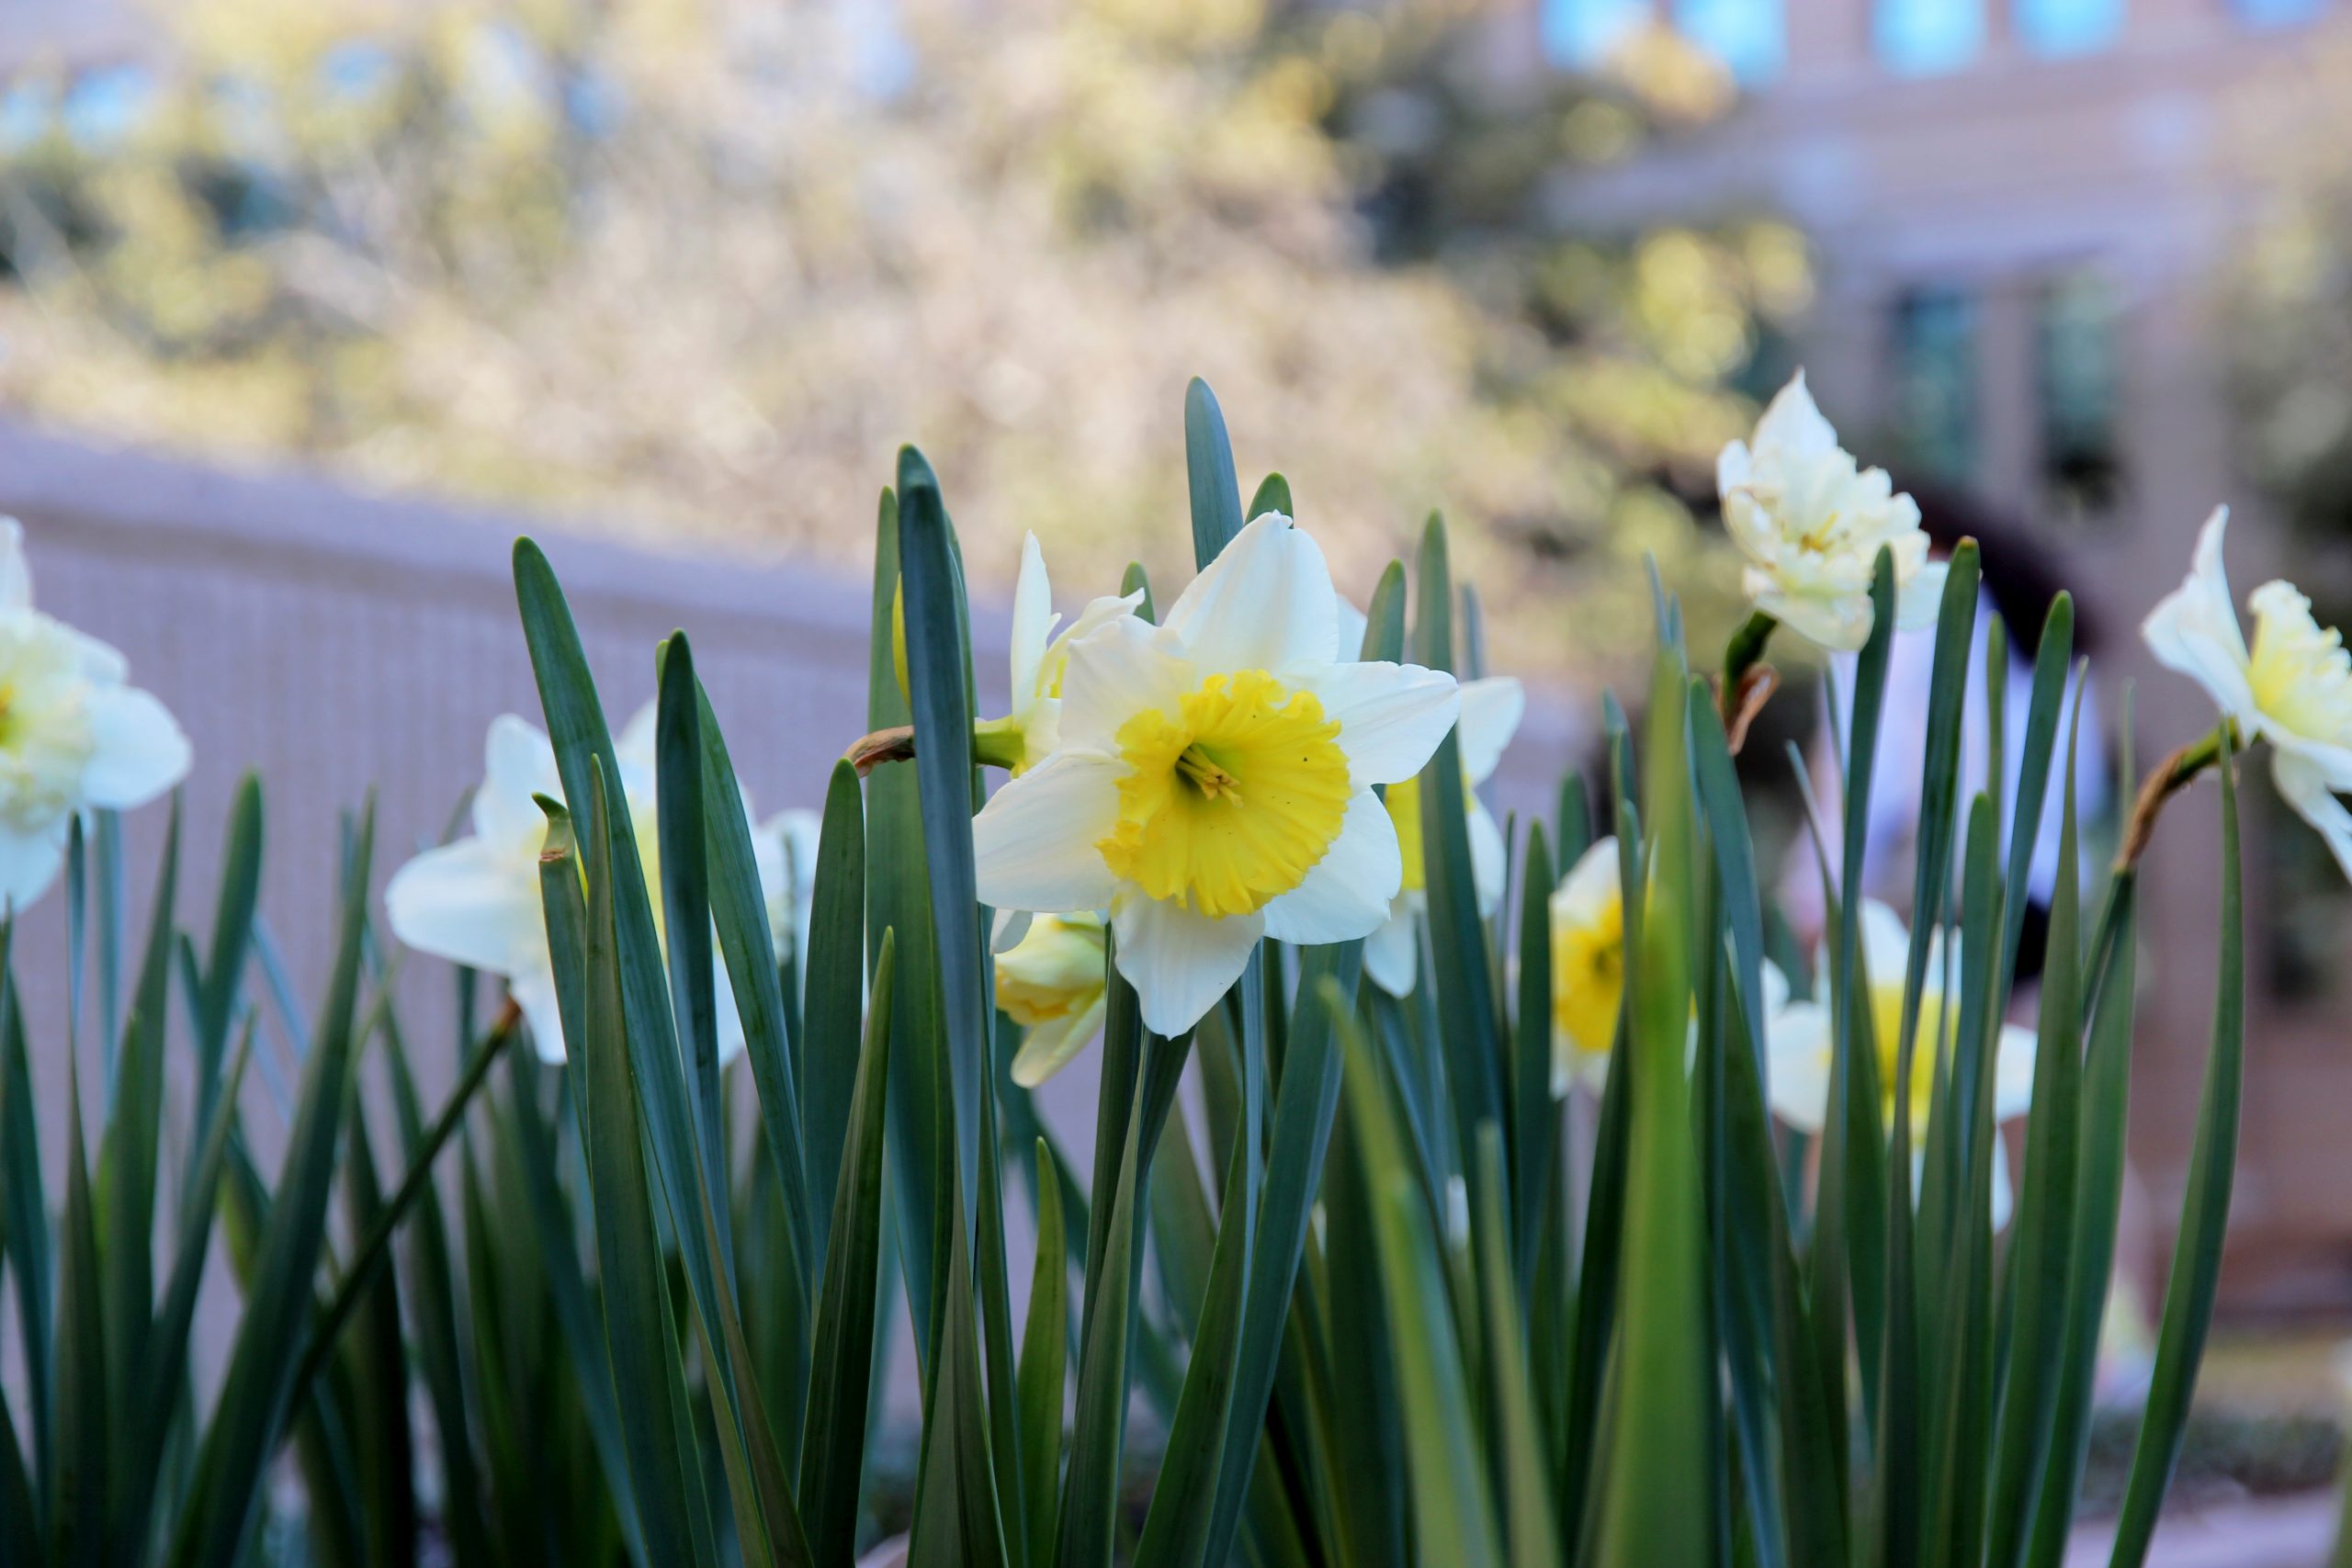 Daffodils in full bloom signal the beginning of spring.